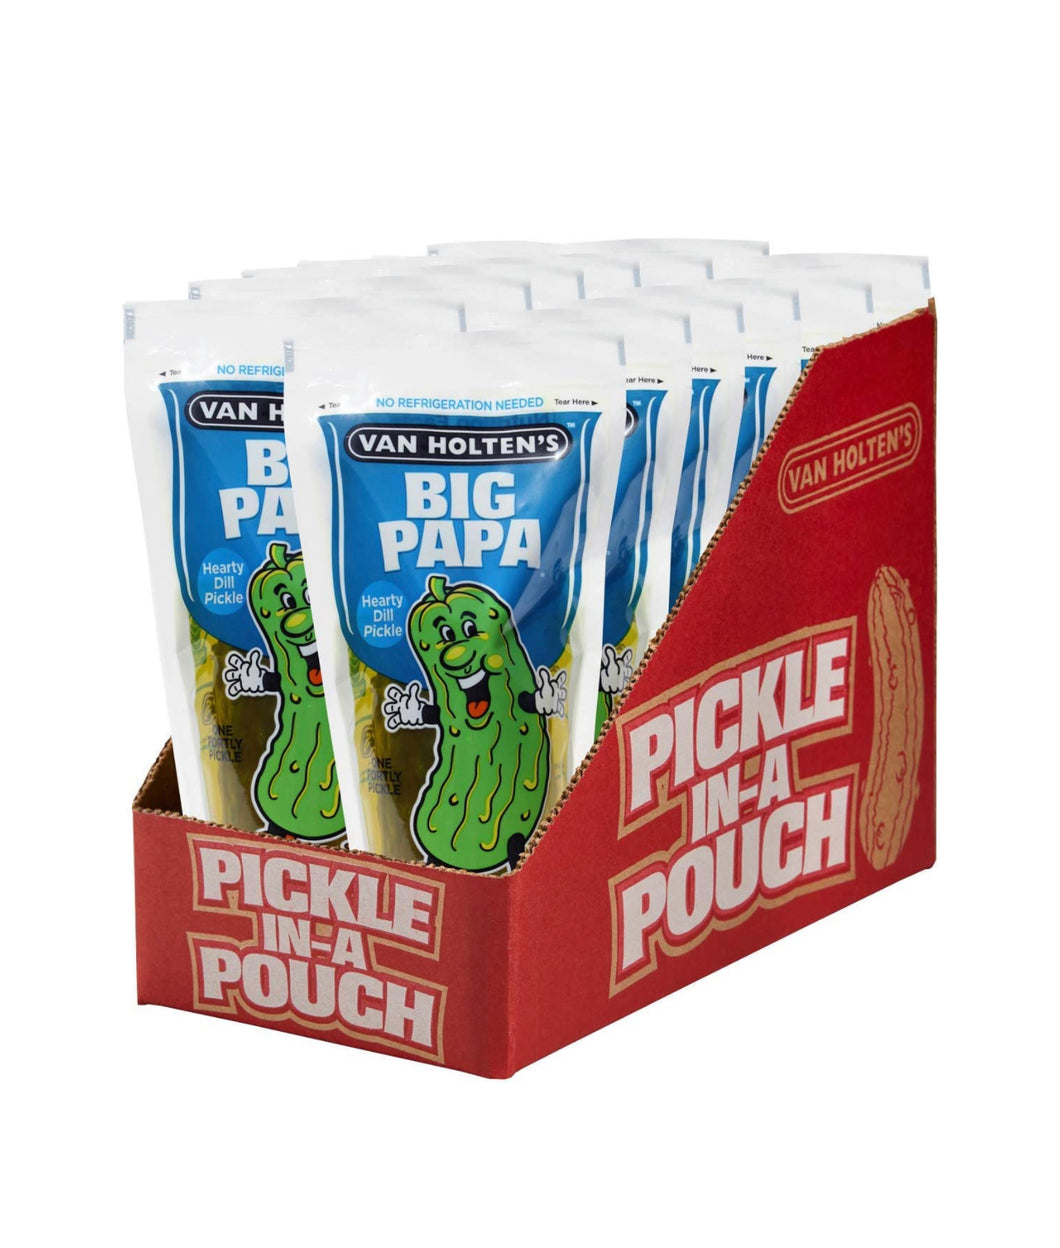 Pickle in a pouch Big Papa